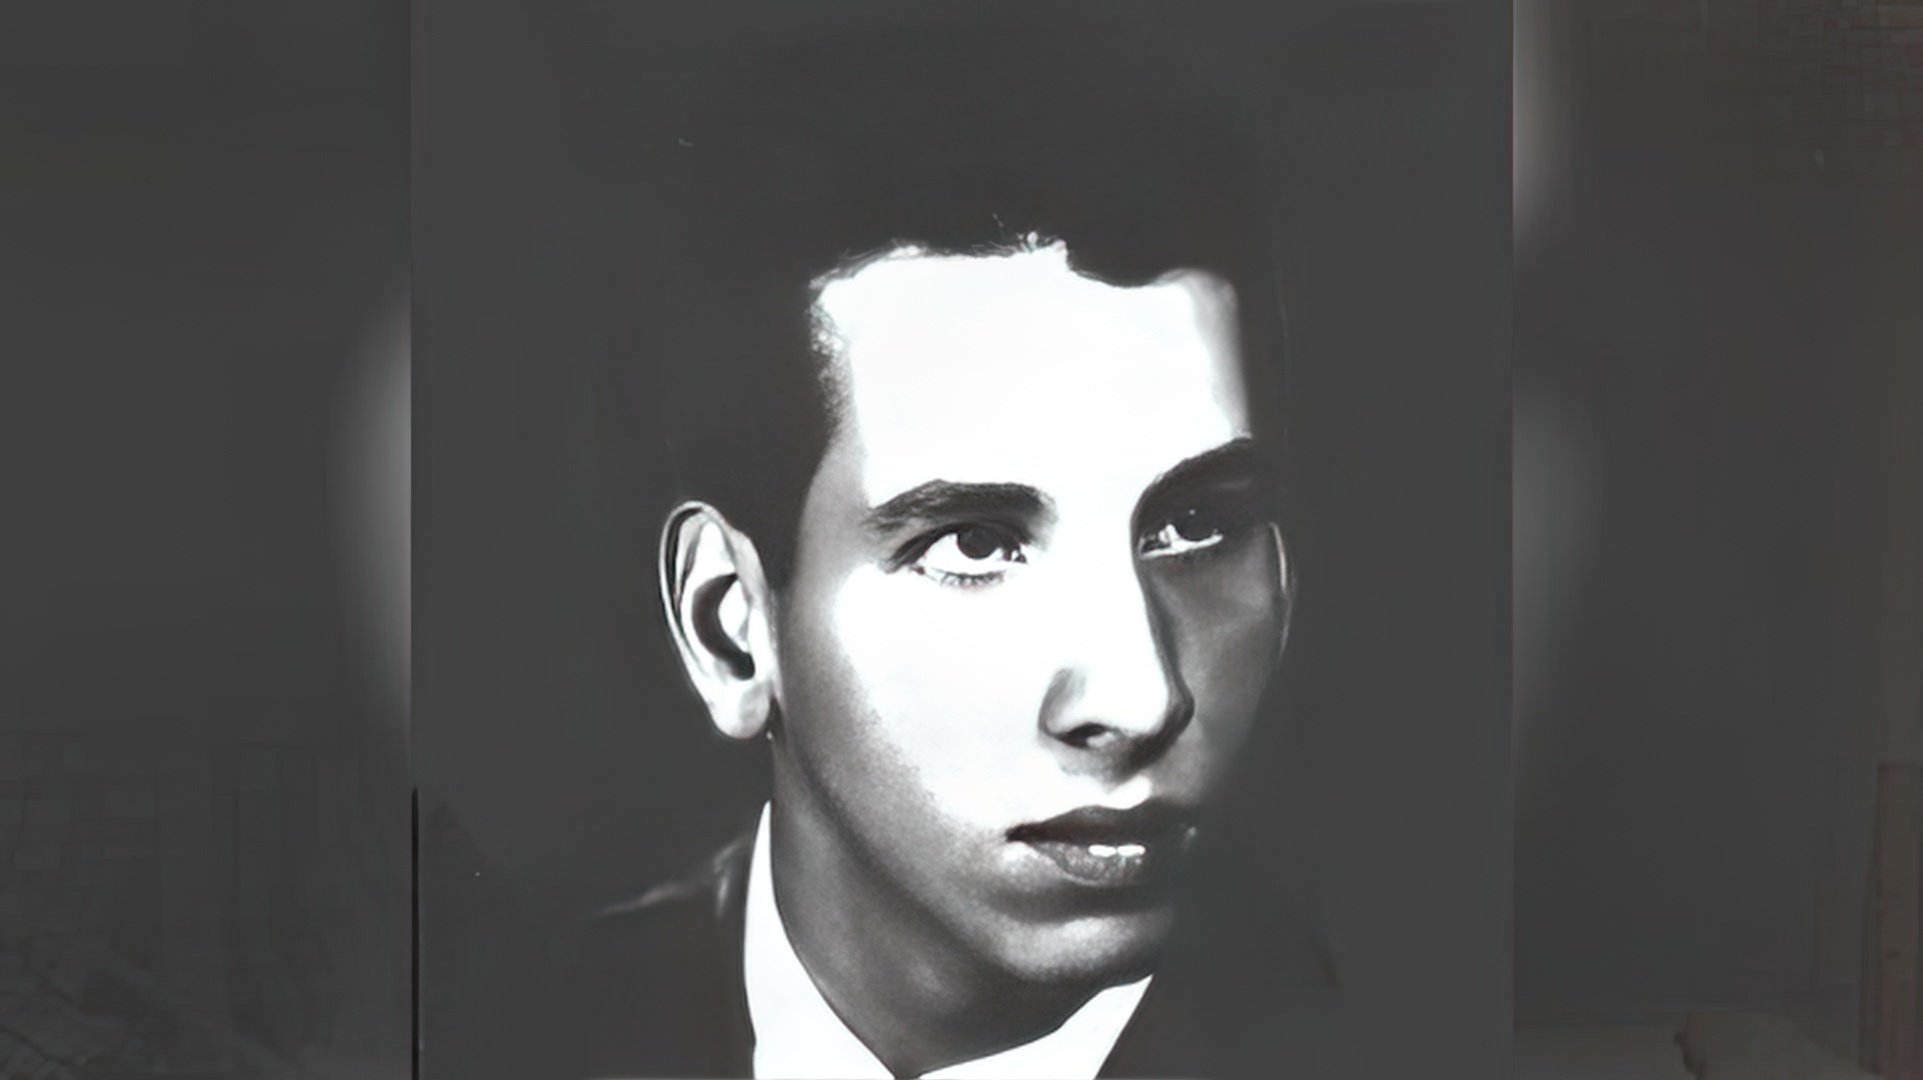 Marilyn Manson in his youth